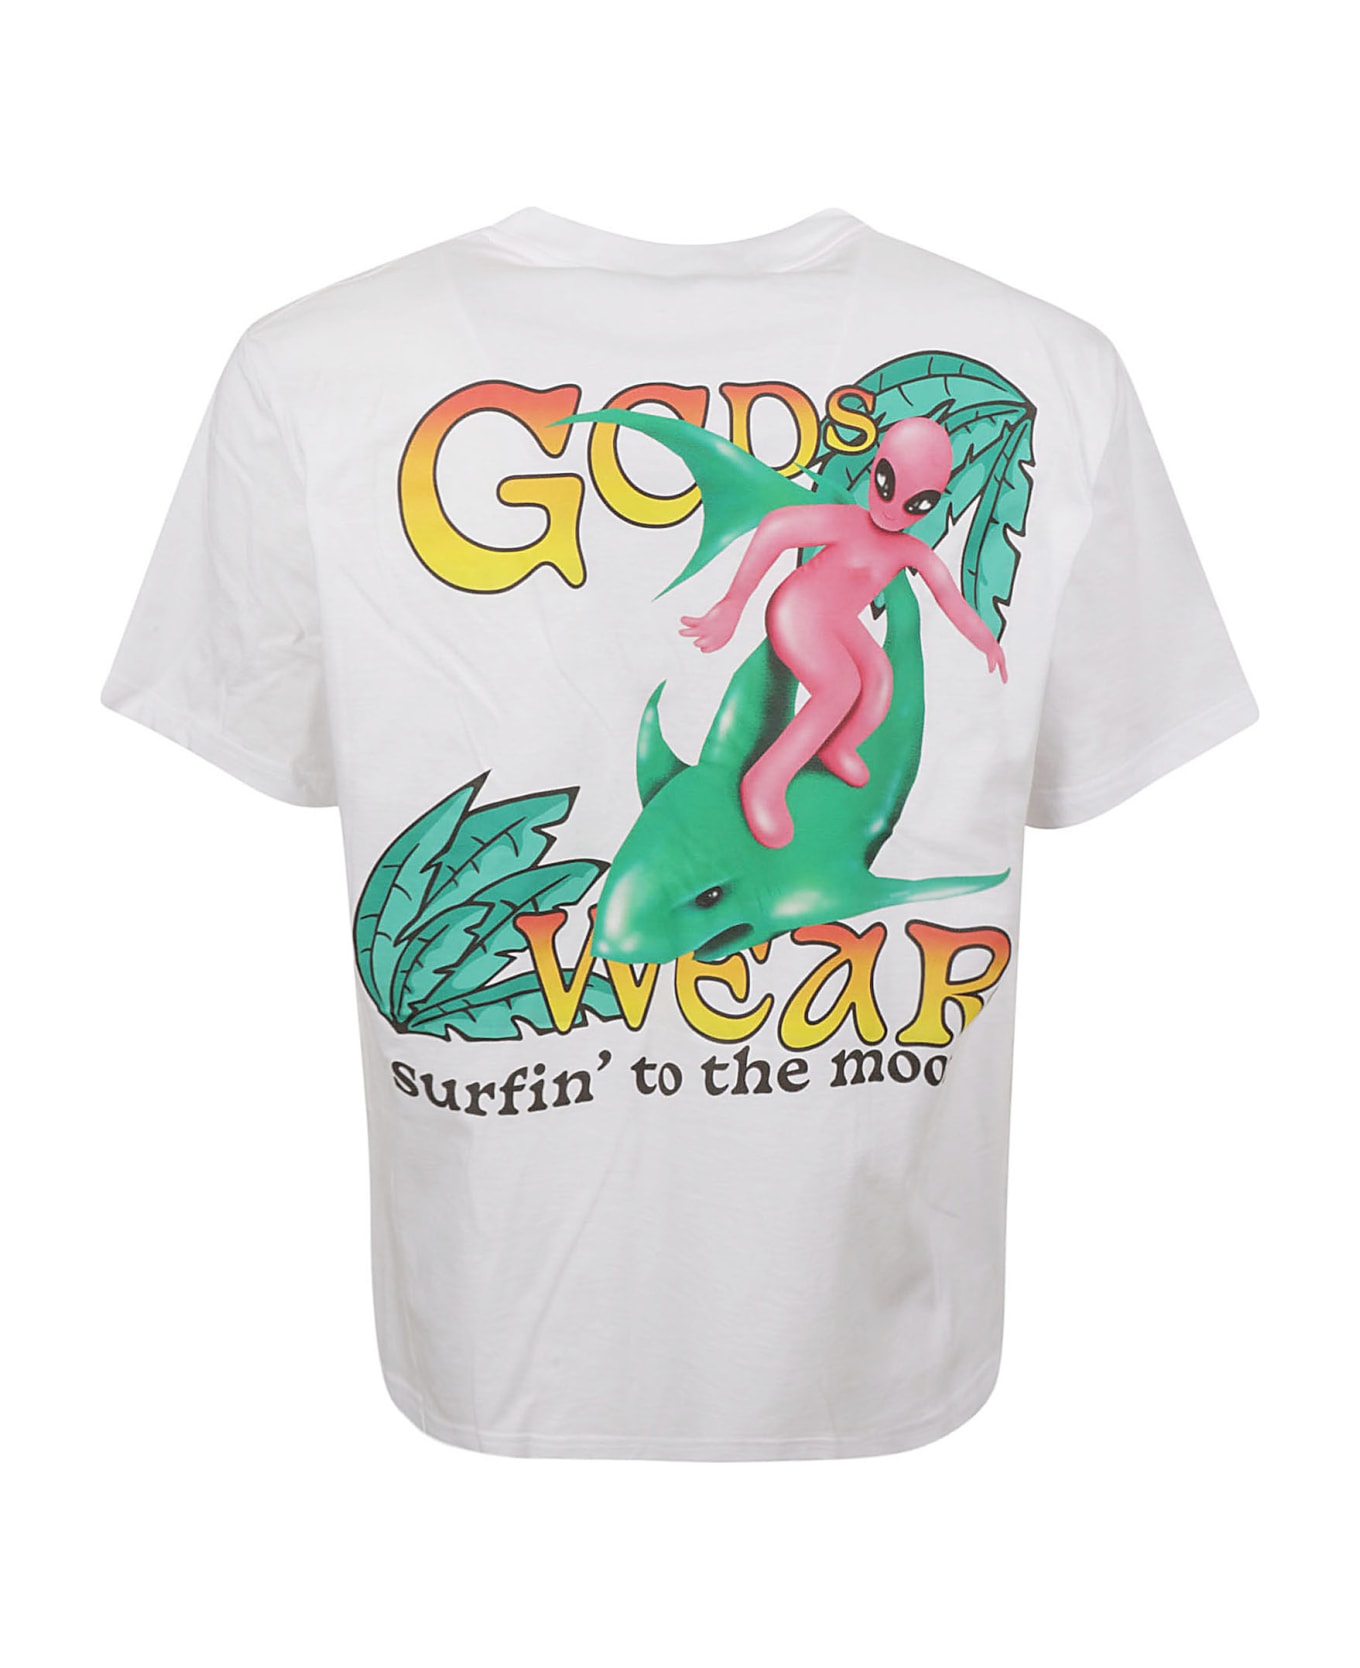 GCDS Surfin To The Moon Printed T-shirt - White